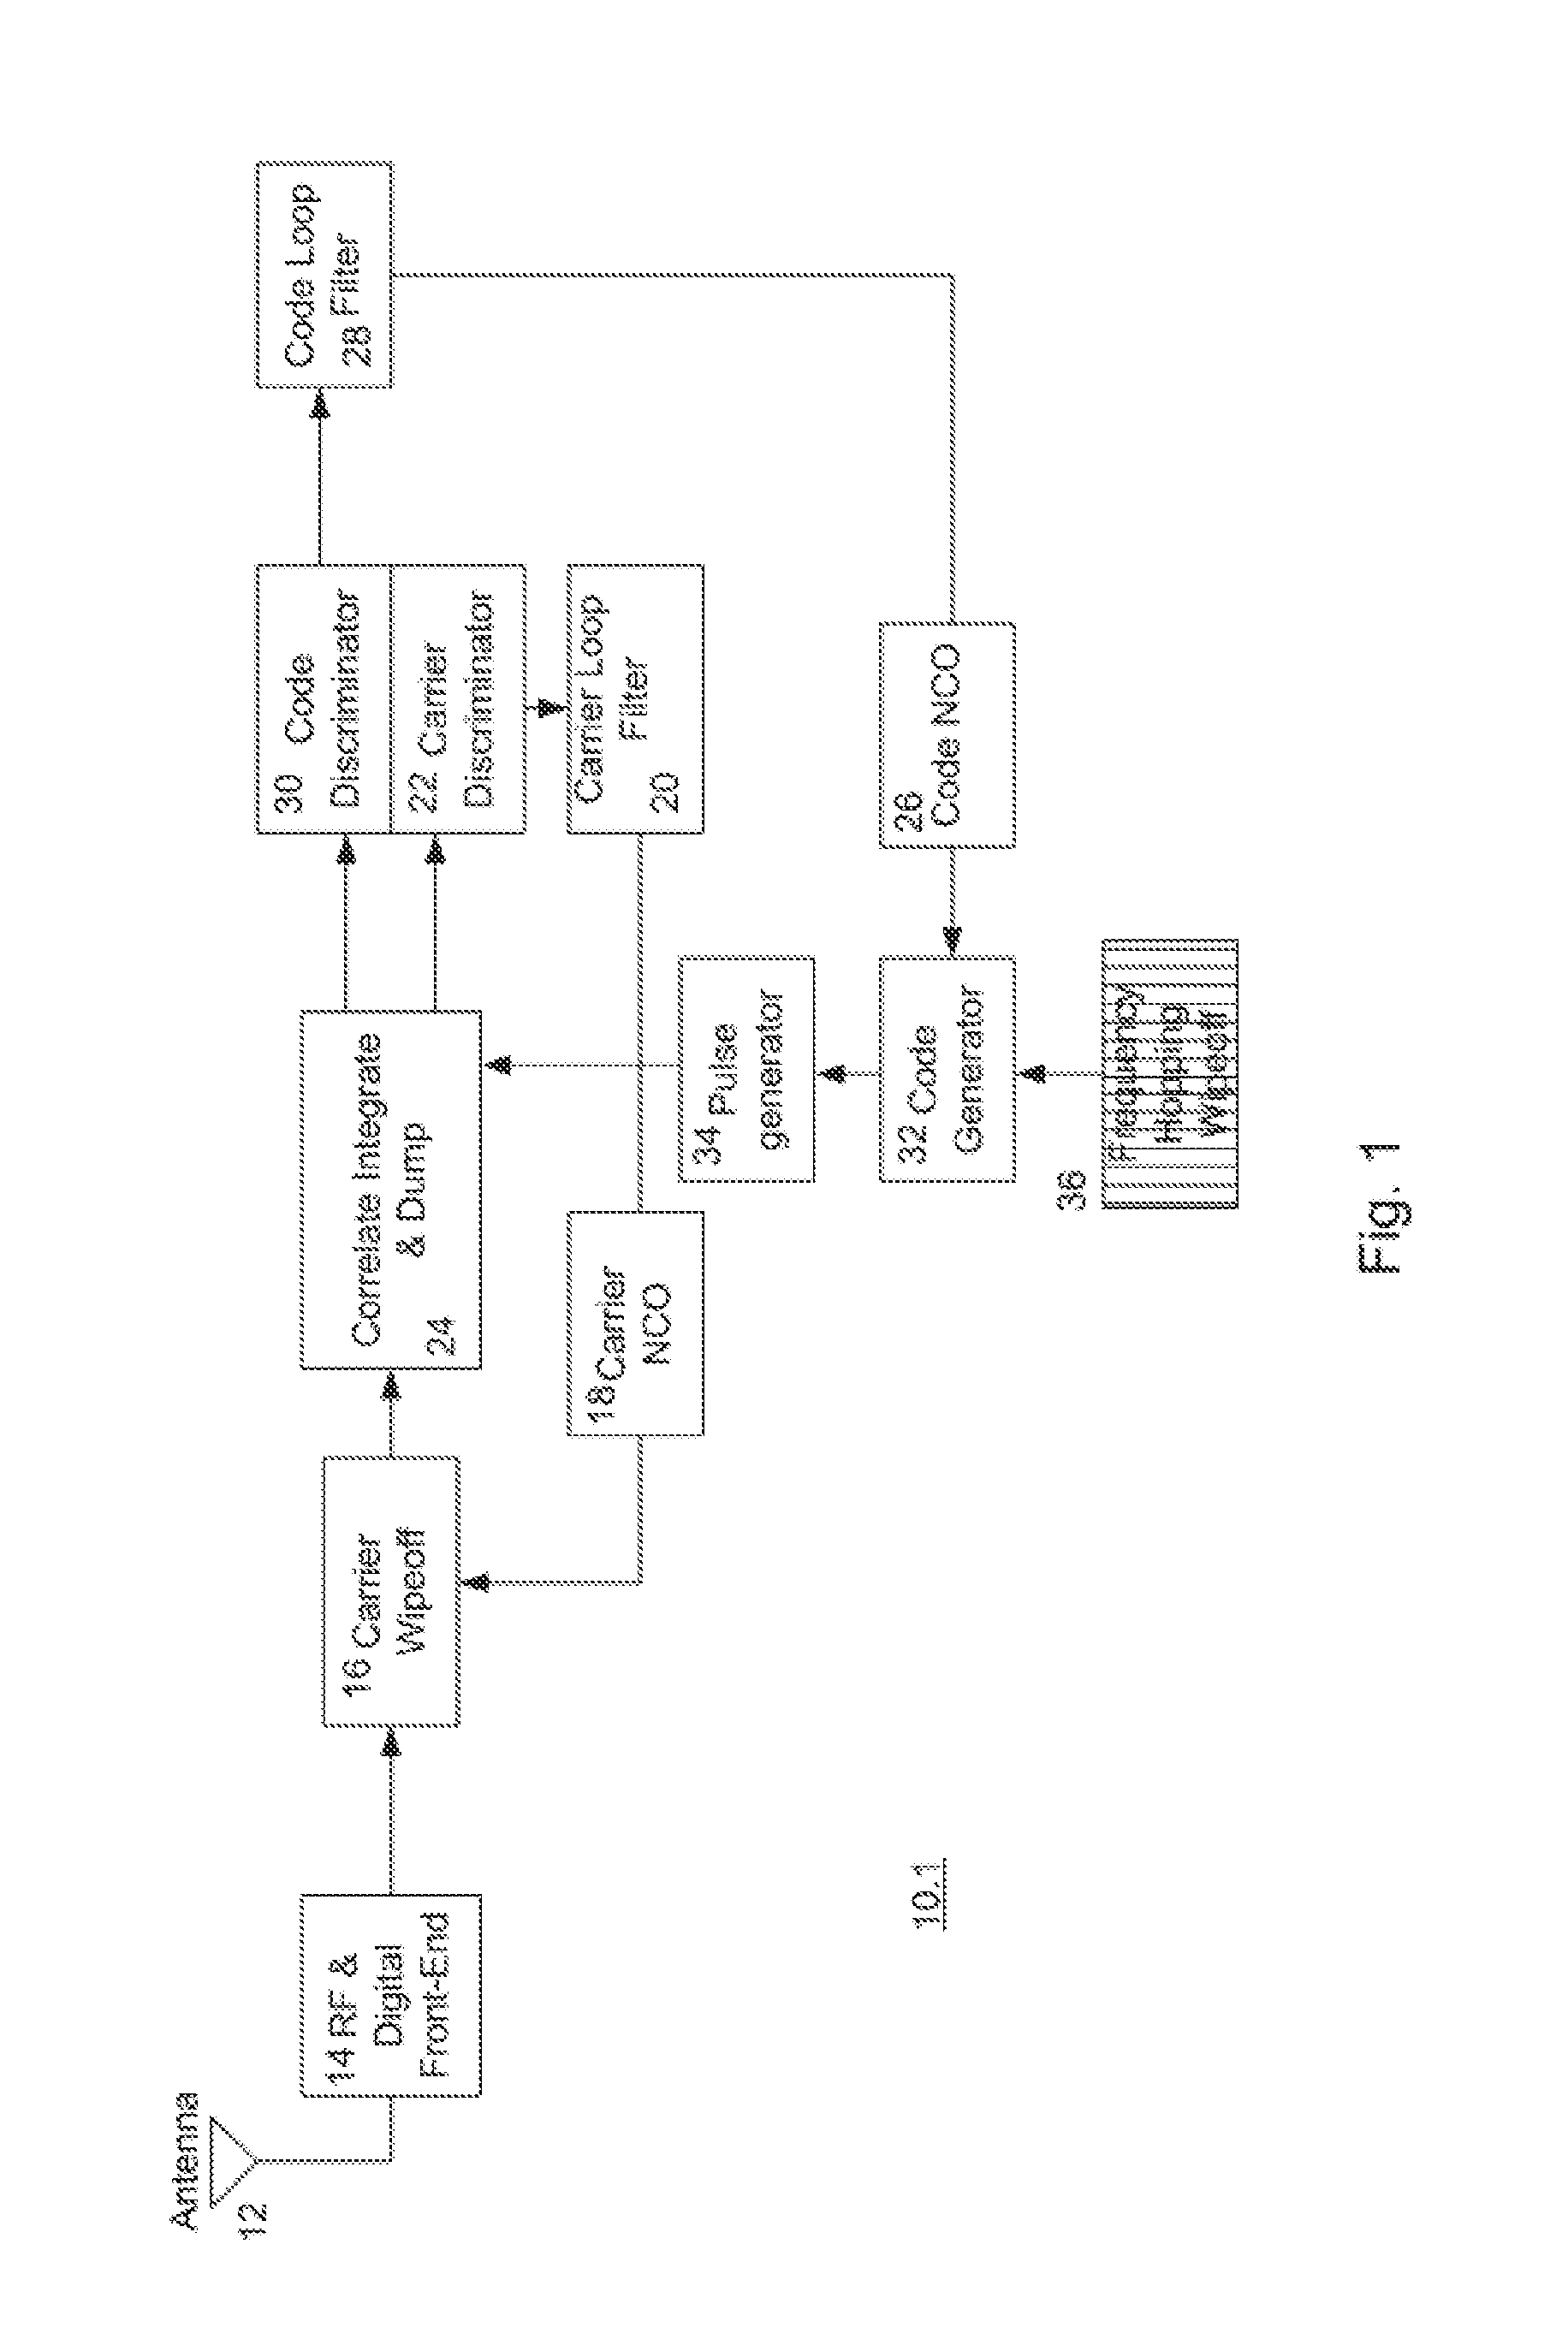 Receiver for Acquiring and Tracking Spread Spectrum Navigation Signals with Changing Subcarriers